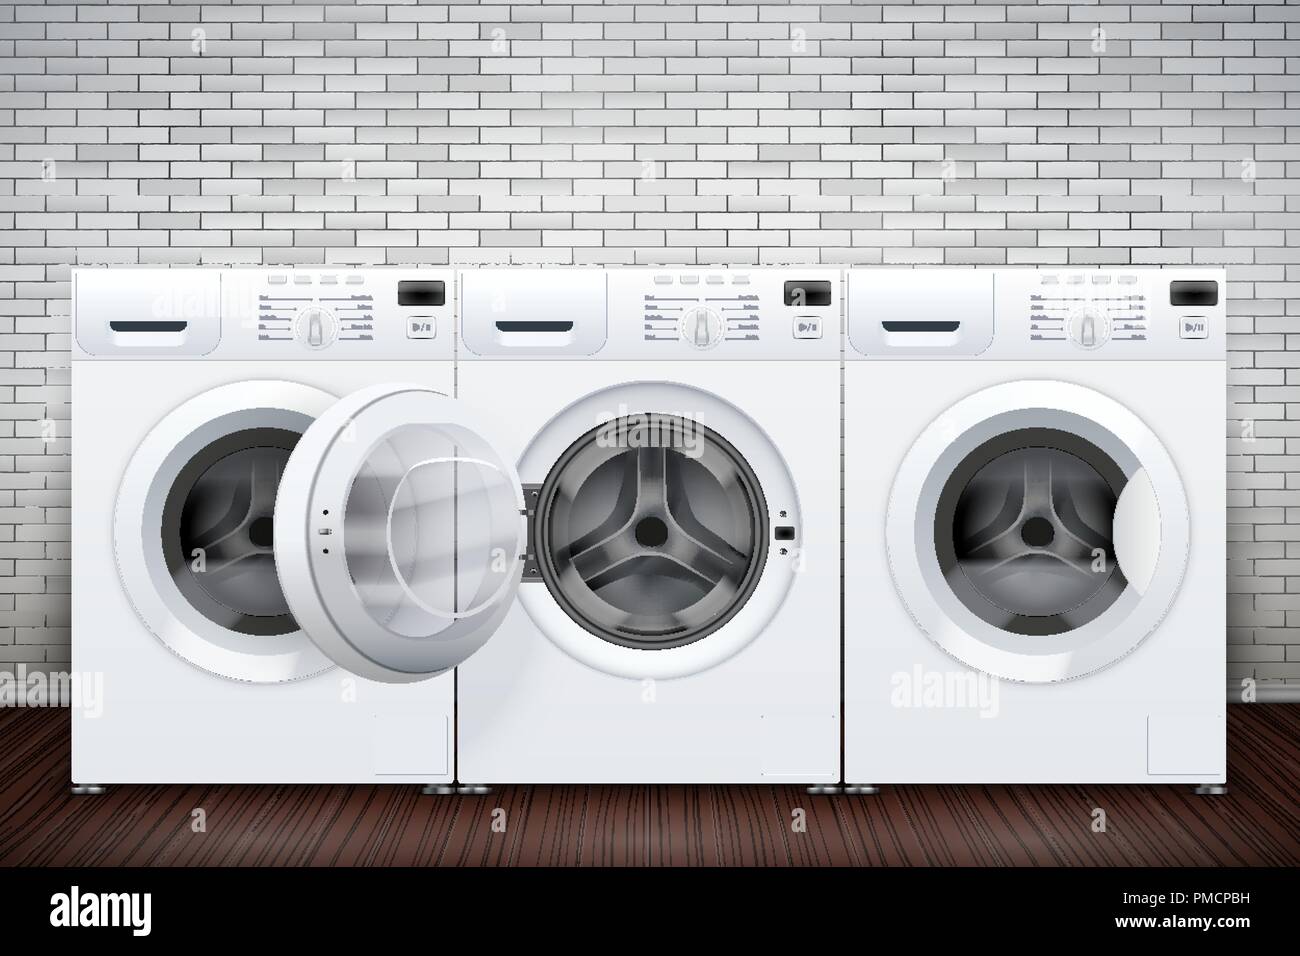 Laundry room of brick wall and washing machines Stock Vector